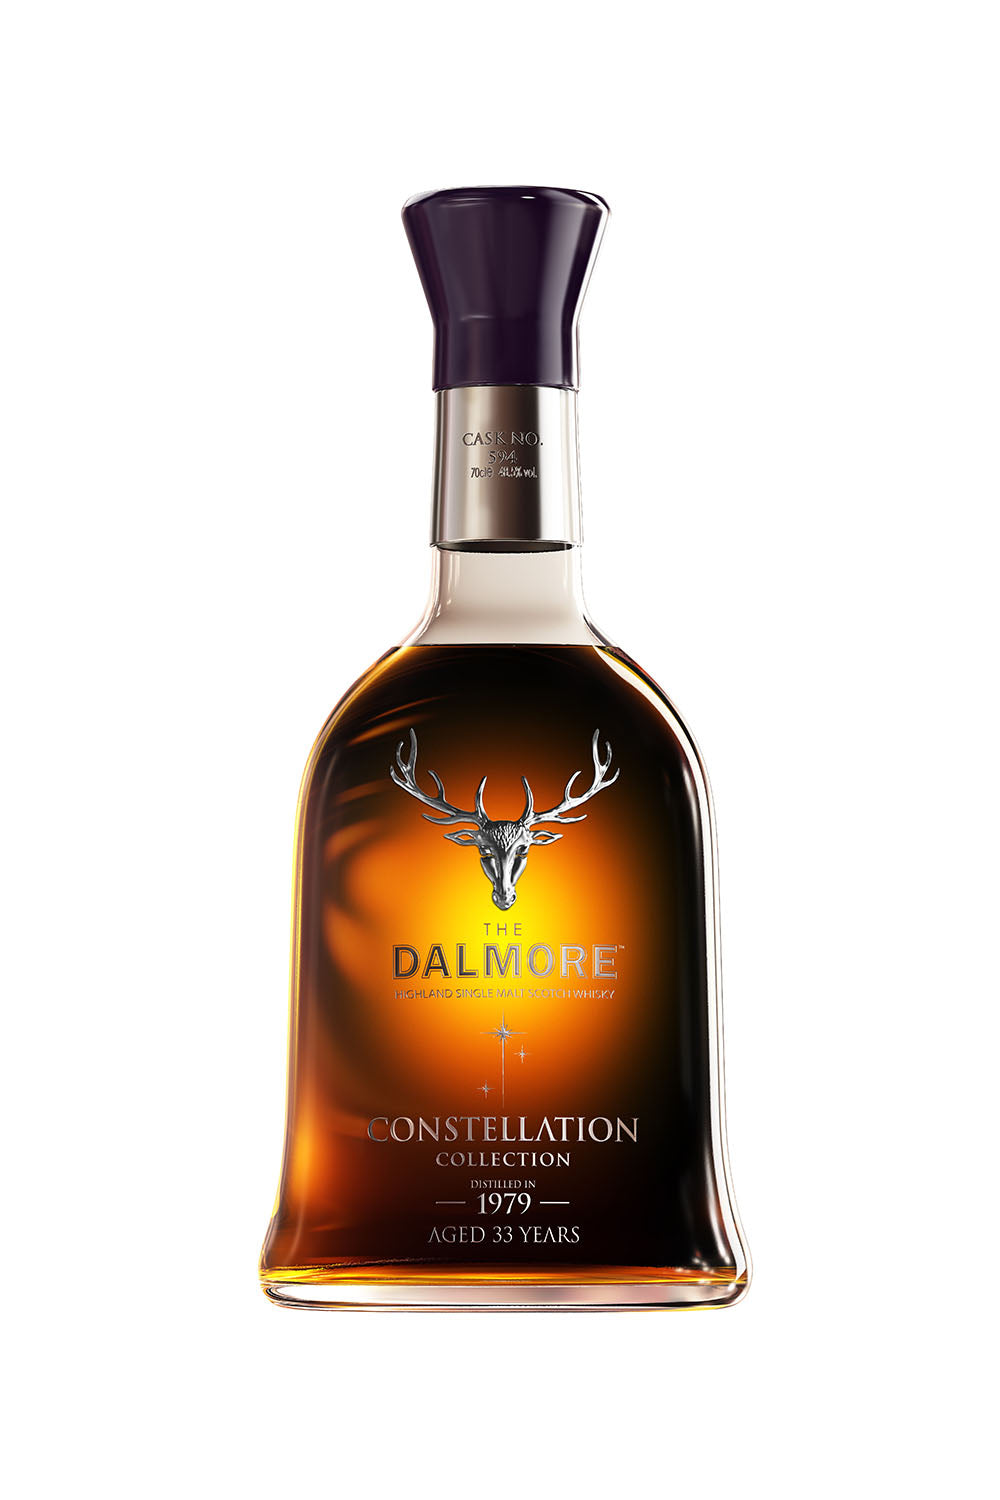 The Dalmore 1979 Constellation - Cask 594